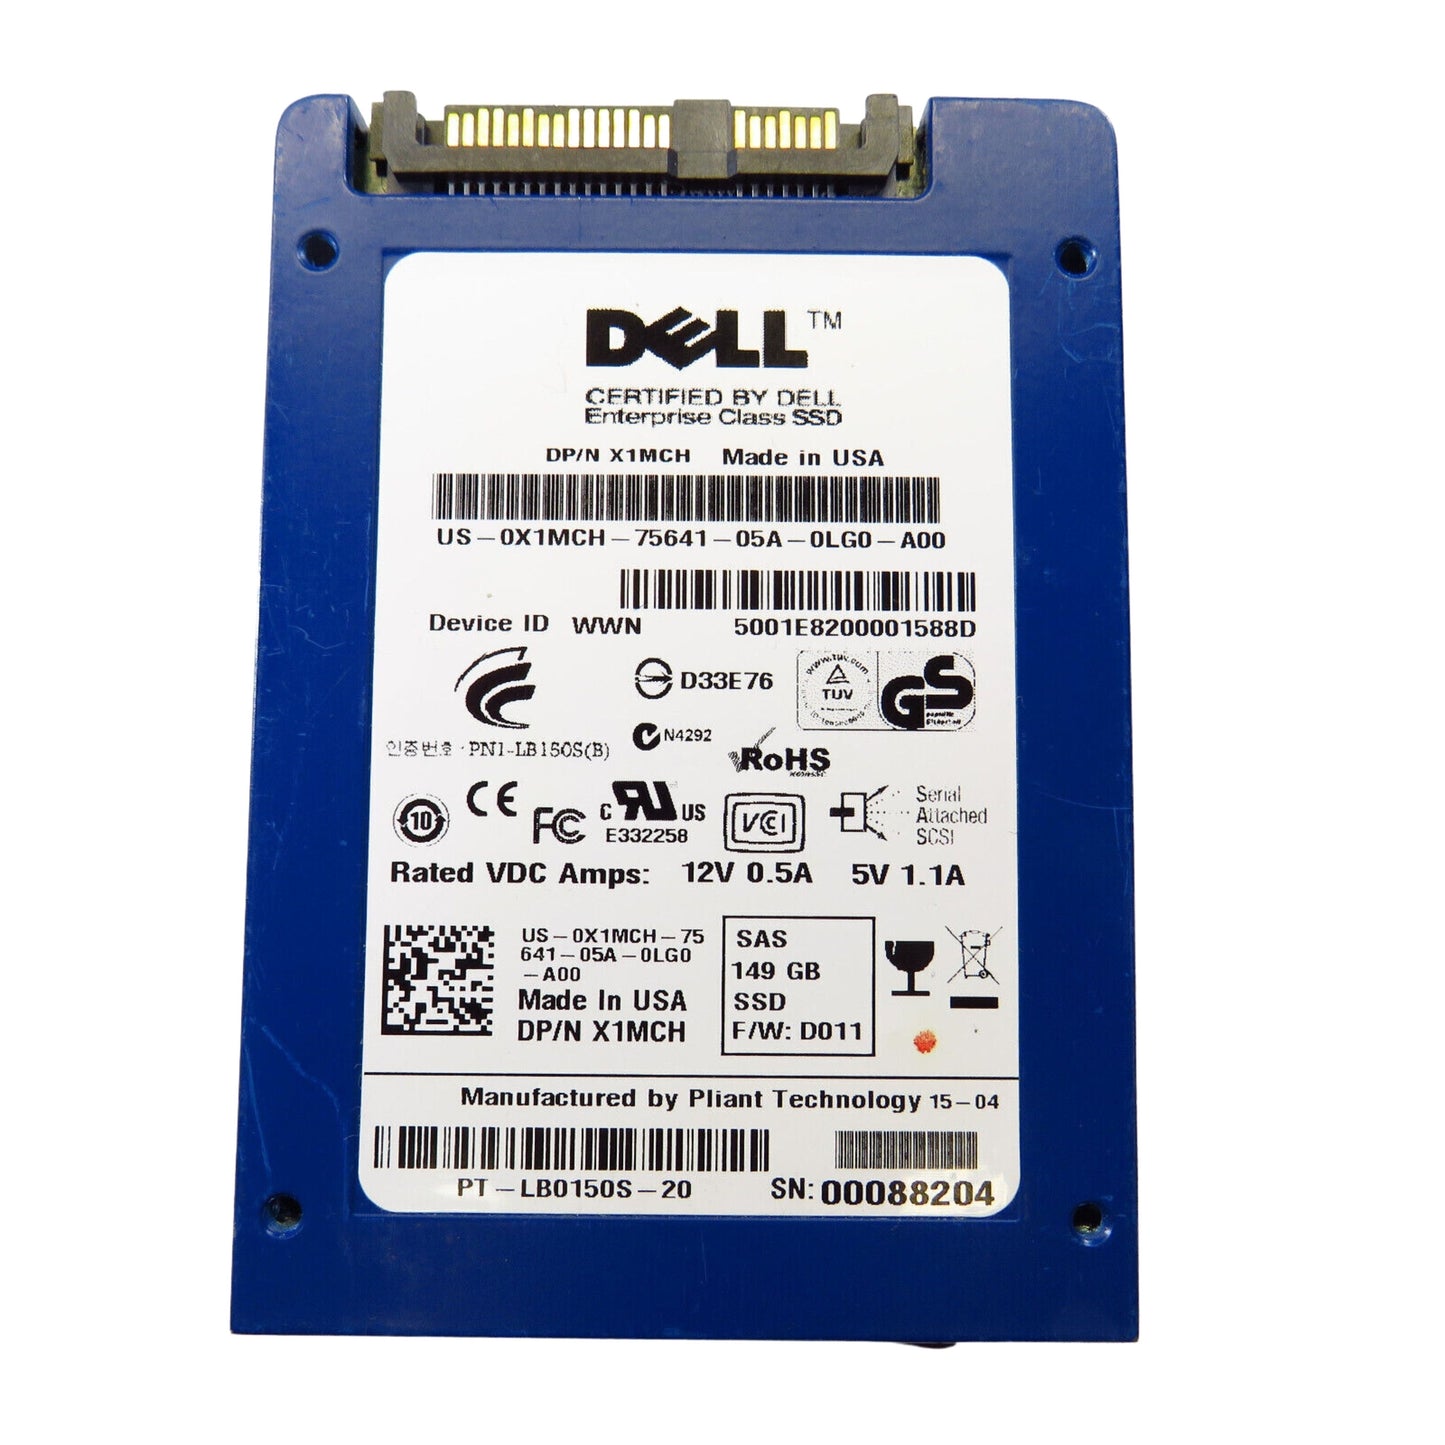 Dell X1MCH 149GB 2.5" SAS 3Gbps Enterprise SSD Solid State Drive (Refurbished)